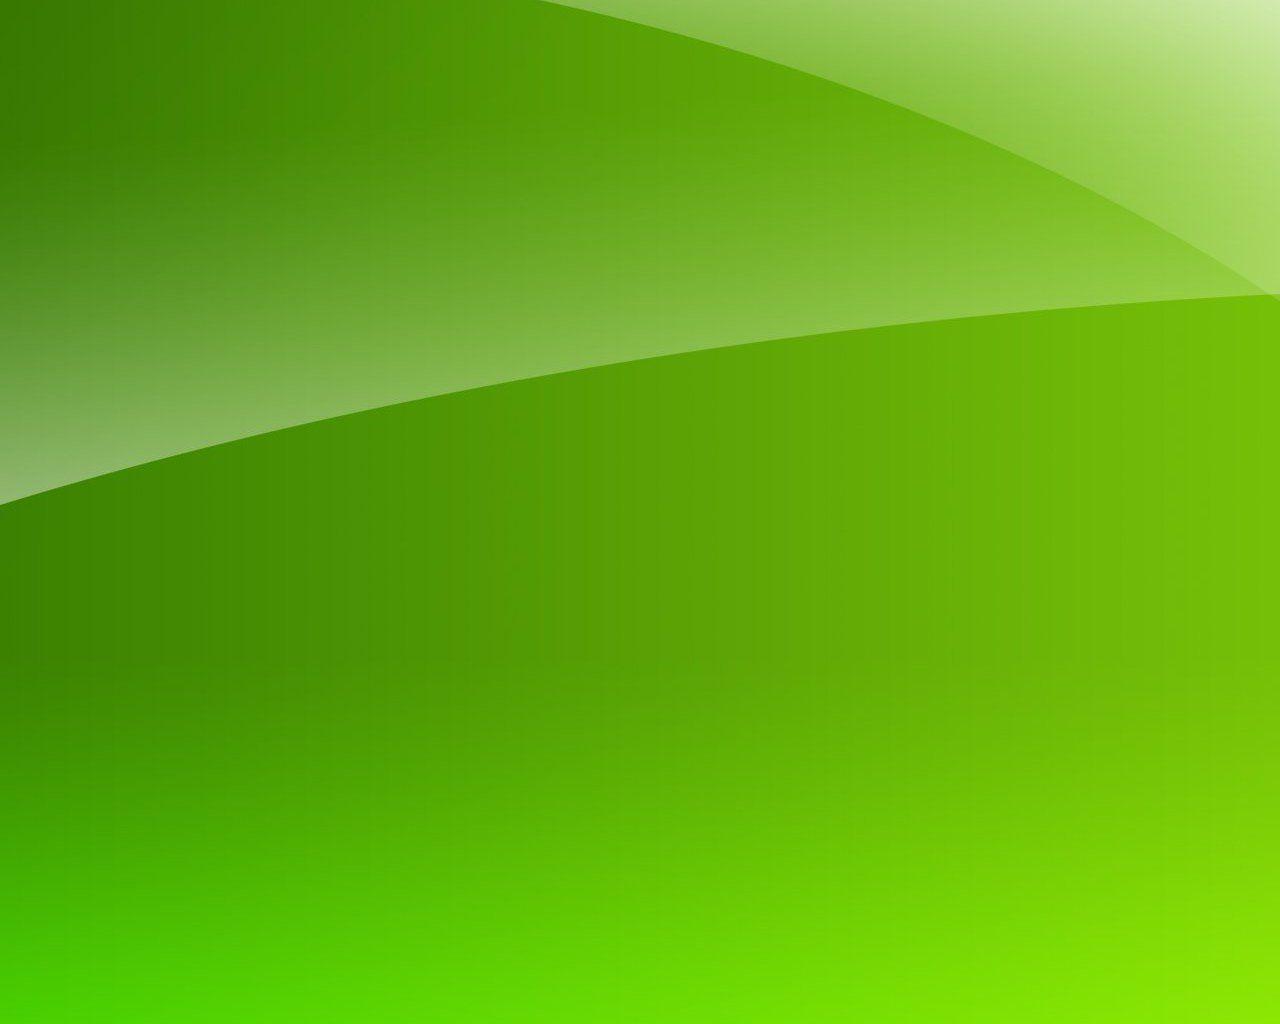 Light Green Simple Background Wallpaper Background Wallpaper Simple  Background Image And Wallpaper for Free Download